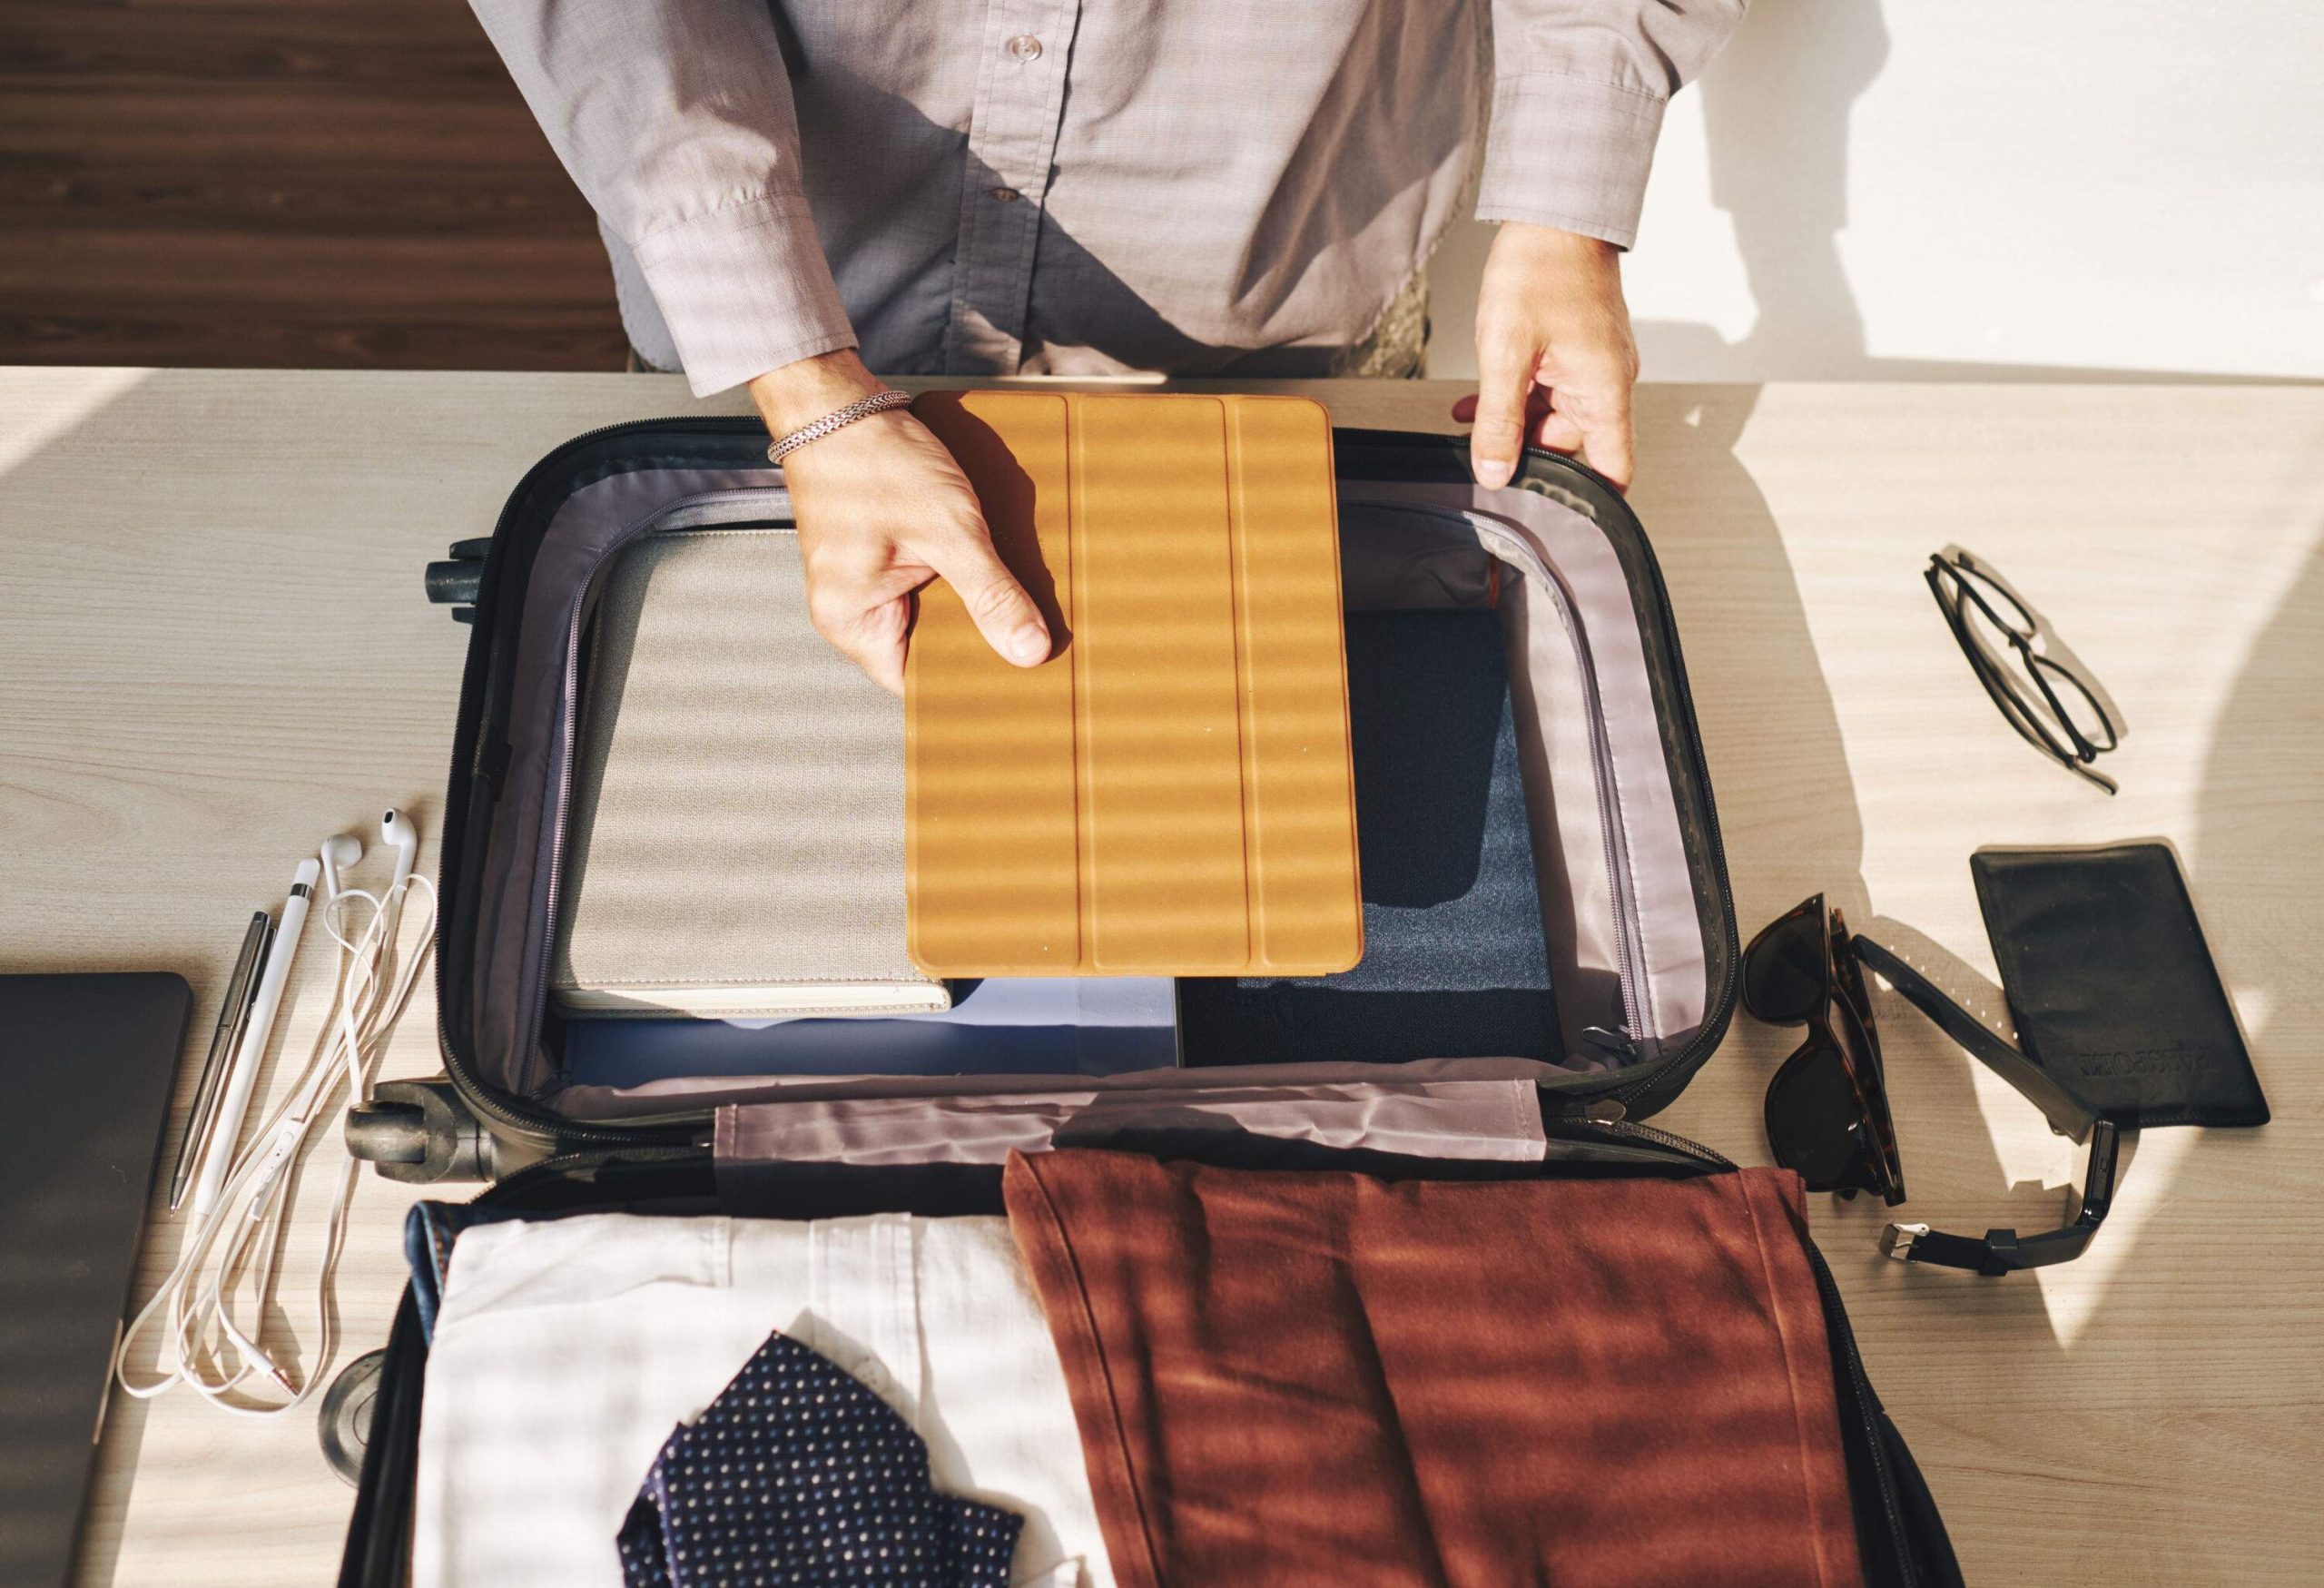 An individual puts an iPad inside a suitcase of his belongings.